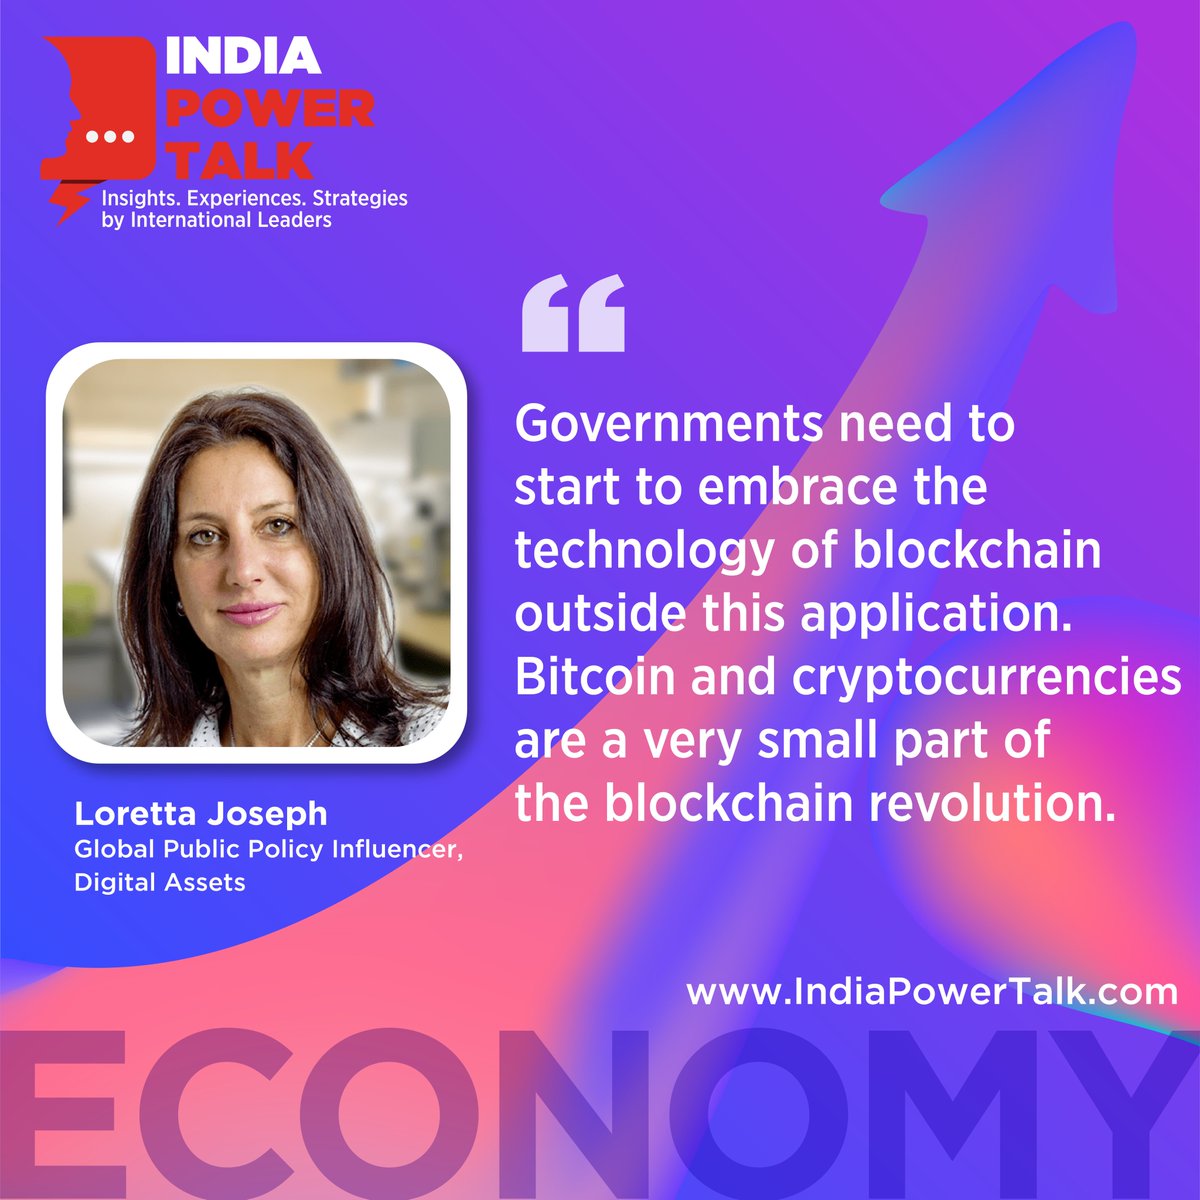 Here's an insightful quote from Loretta Joseph's India Power Talk on 'Digital Assets' with Mr. Nitin Potdar.
Watch the full episode -youtu.be/OZkDWph6STw

#IndiaPowerTalk #India #NitinPotdar #LorettaJoseph #Economy #Entrepreneurship #Innovation #Globalleaders #Businessfounders